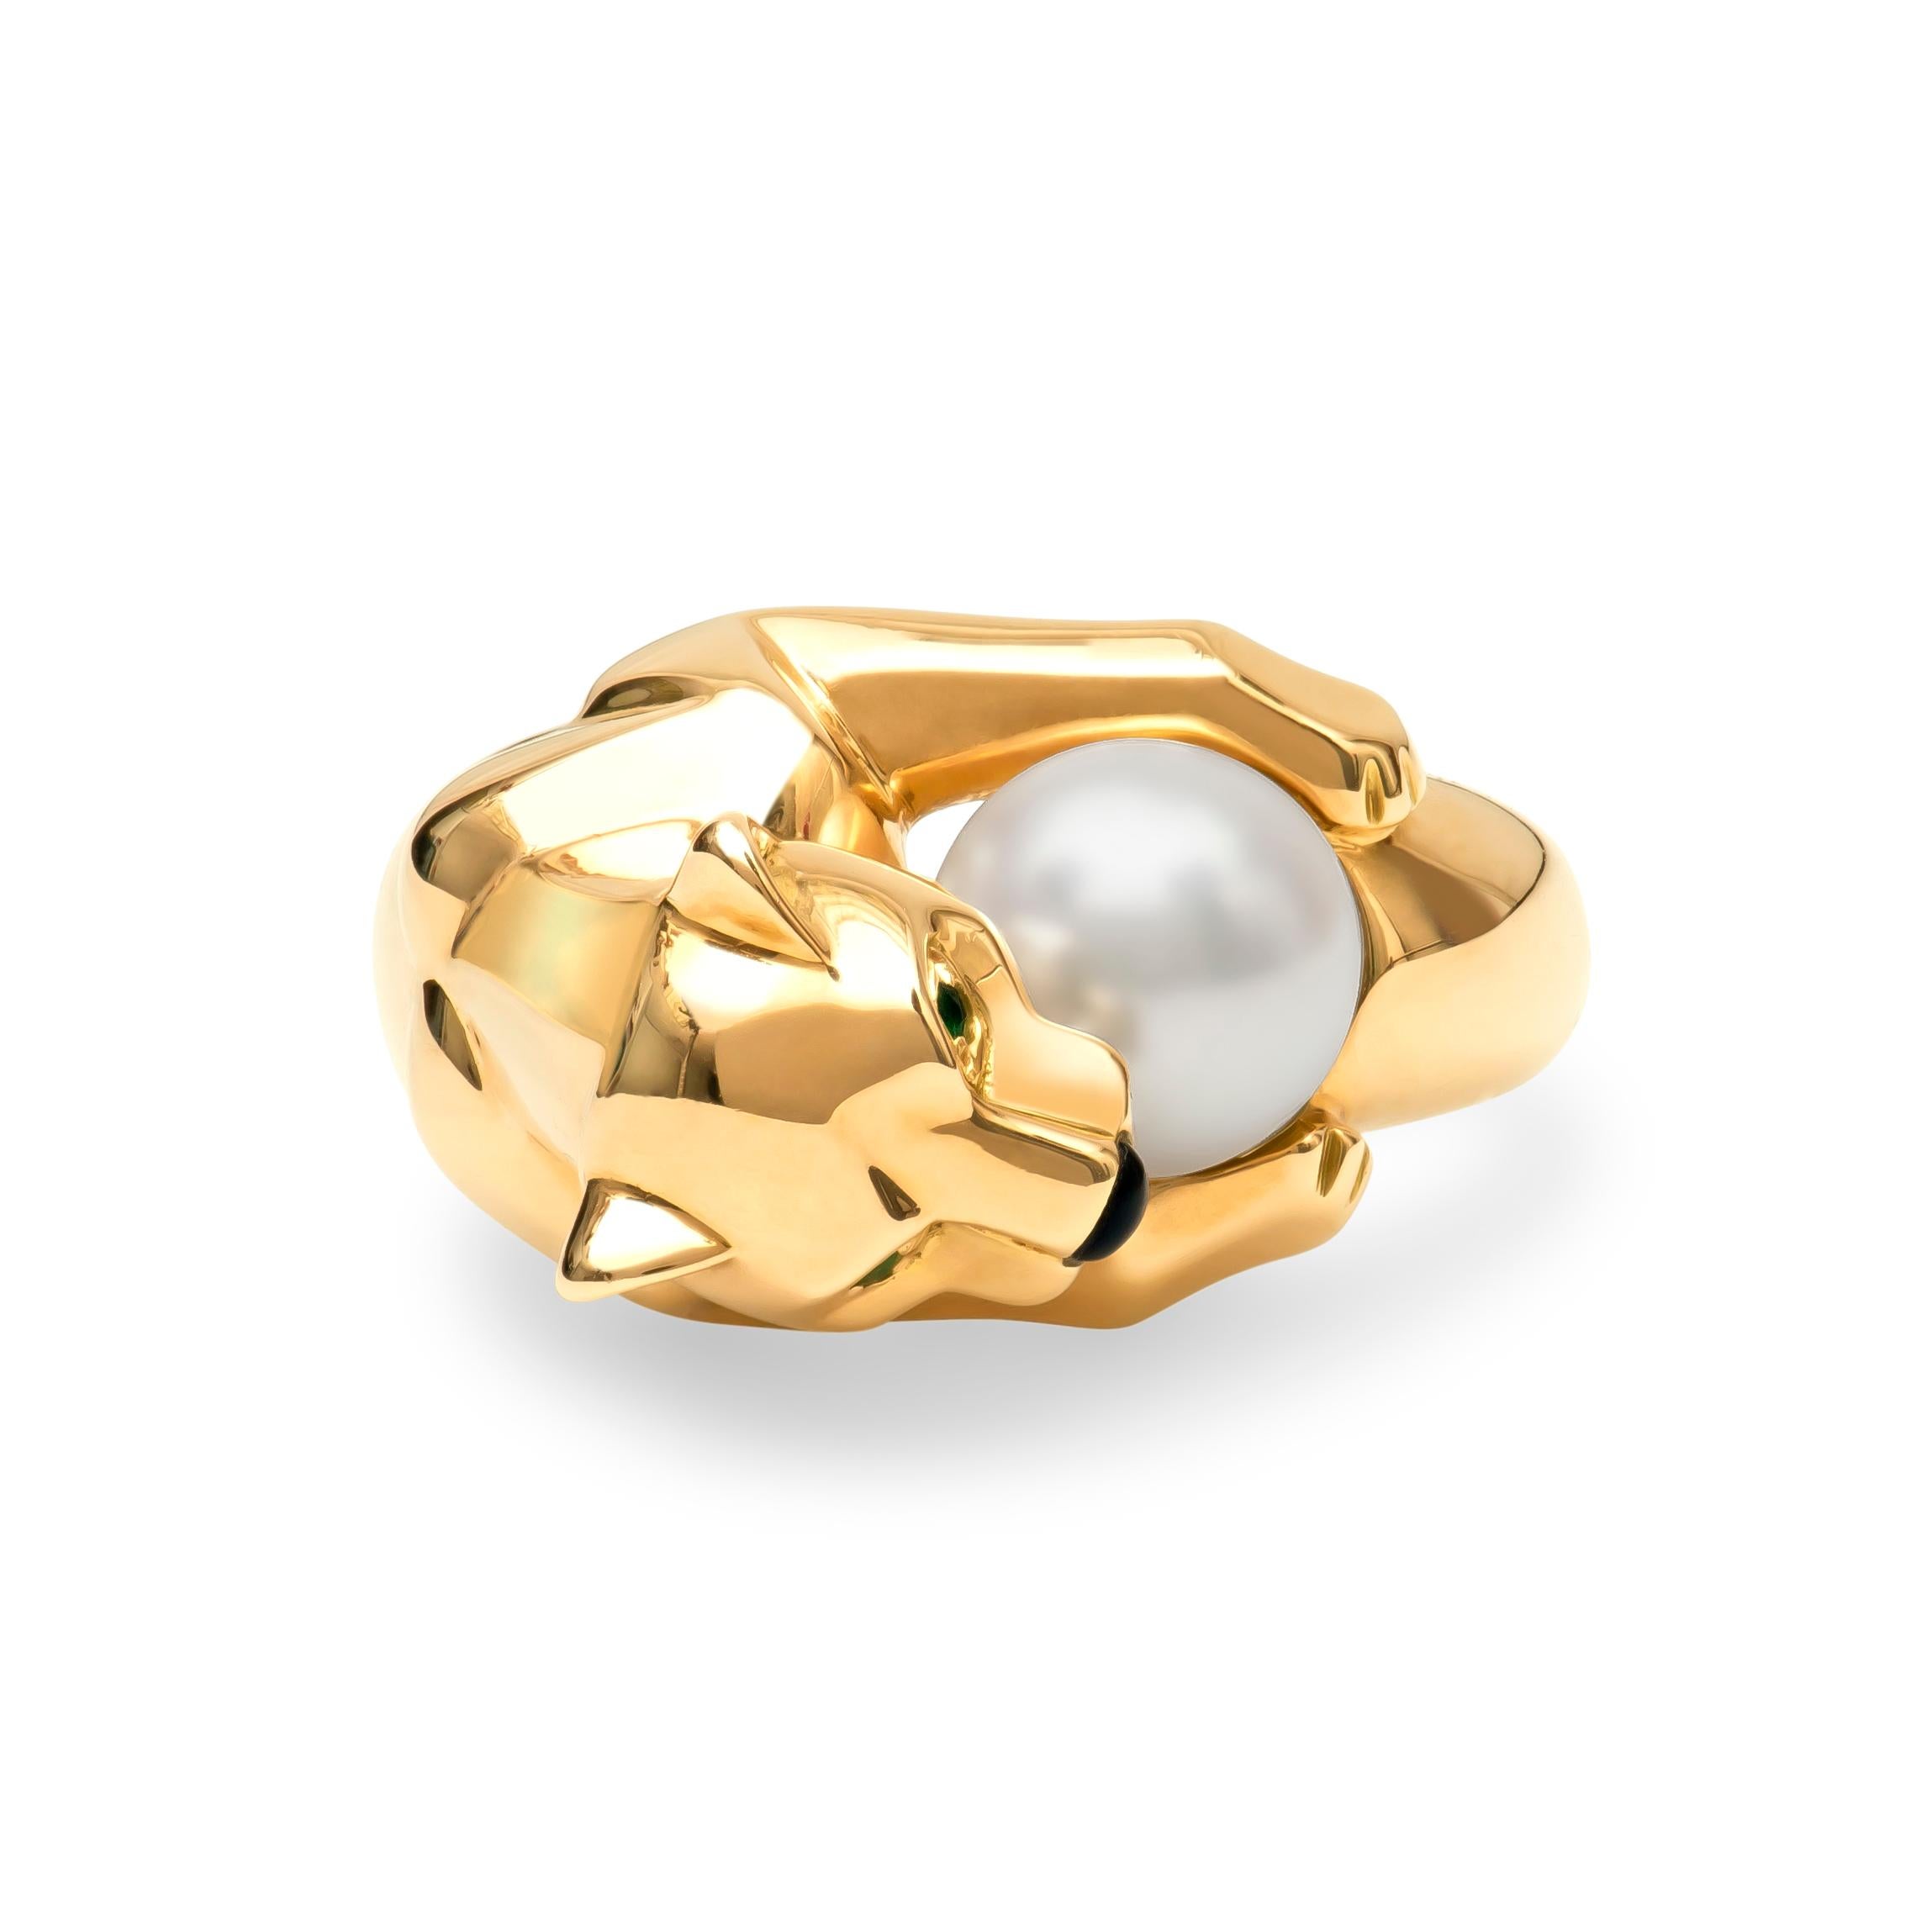 Brand: CARTIER 

Model: PANTHERE

Gender:  WOMENS 

Metal: 18k YELLOW GOLD

Stones: EMERALD &  PEARL.

Ring Size: 52

Hallmark: Cartier 750 52

Cartier Retail: $11,000